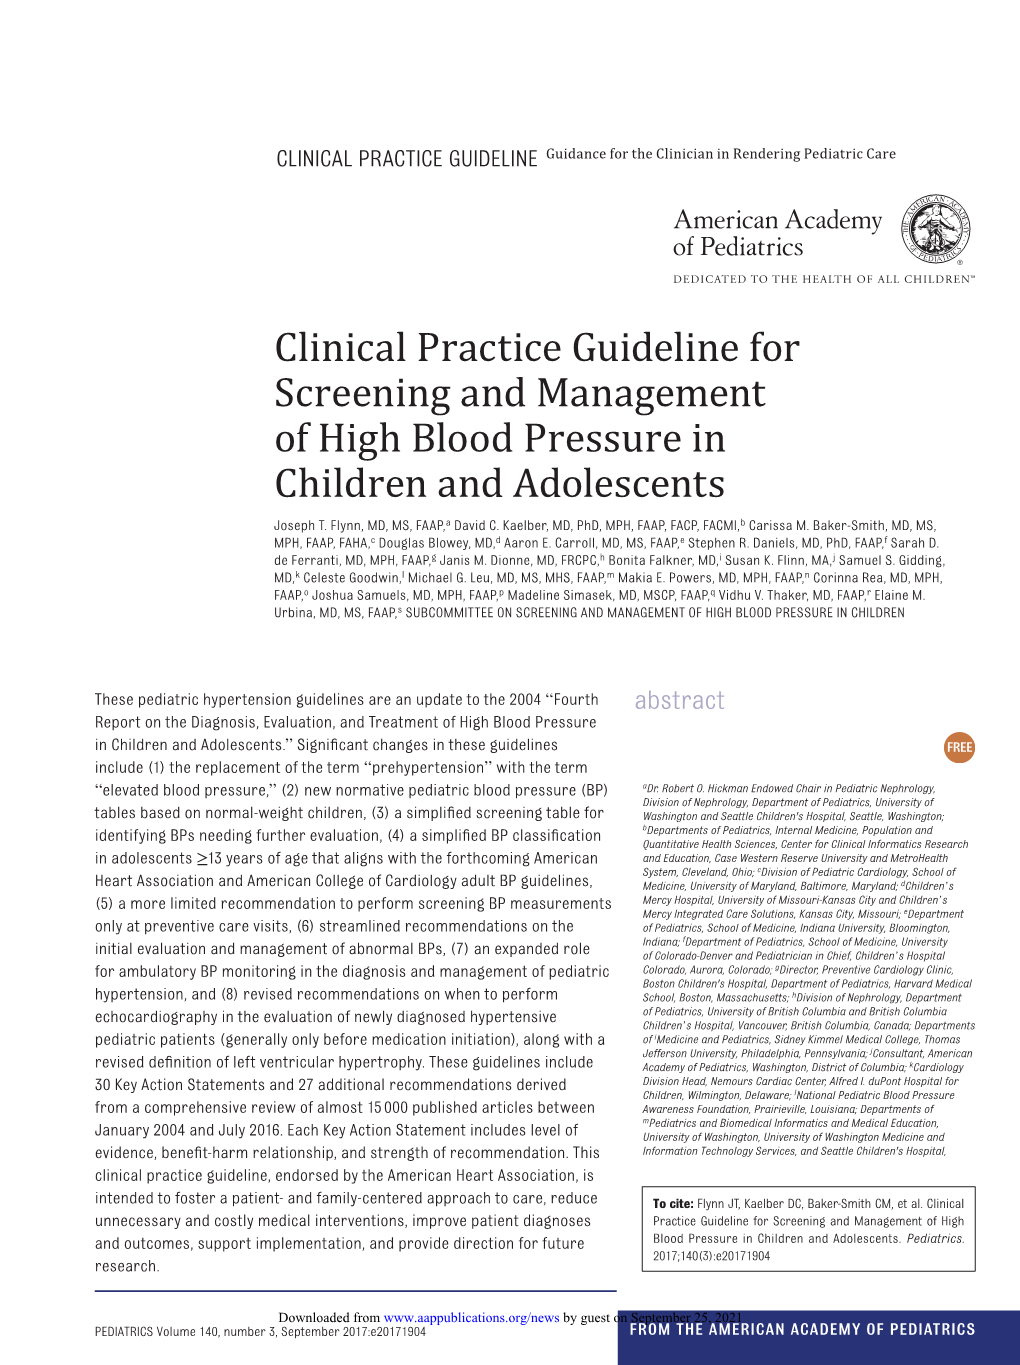 Clinical Practice Guideline for Screening and Management of High Blood Pressure in Children and Adolescents Joseph T